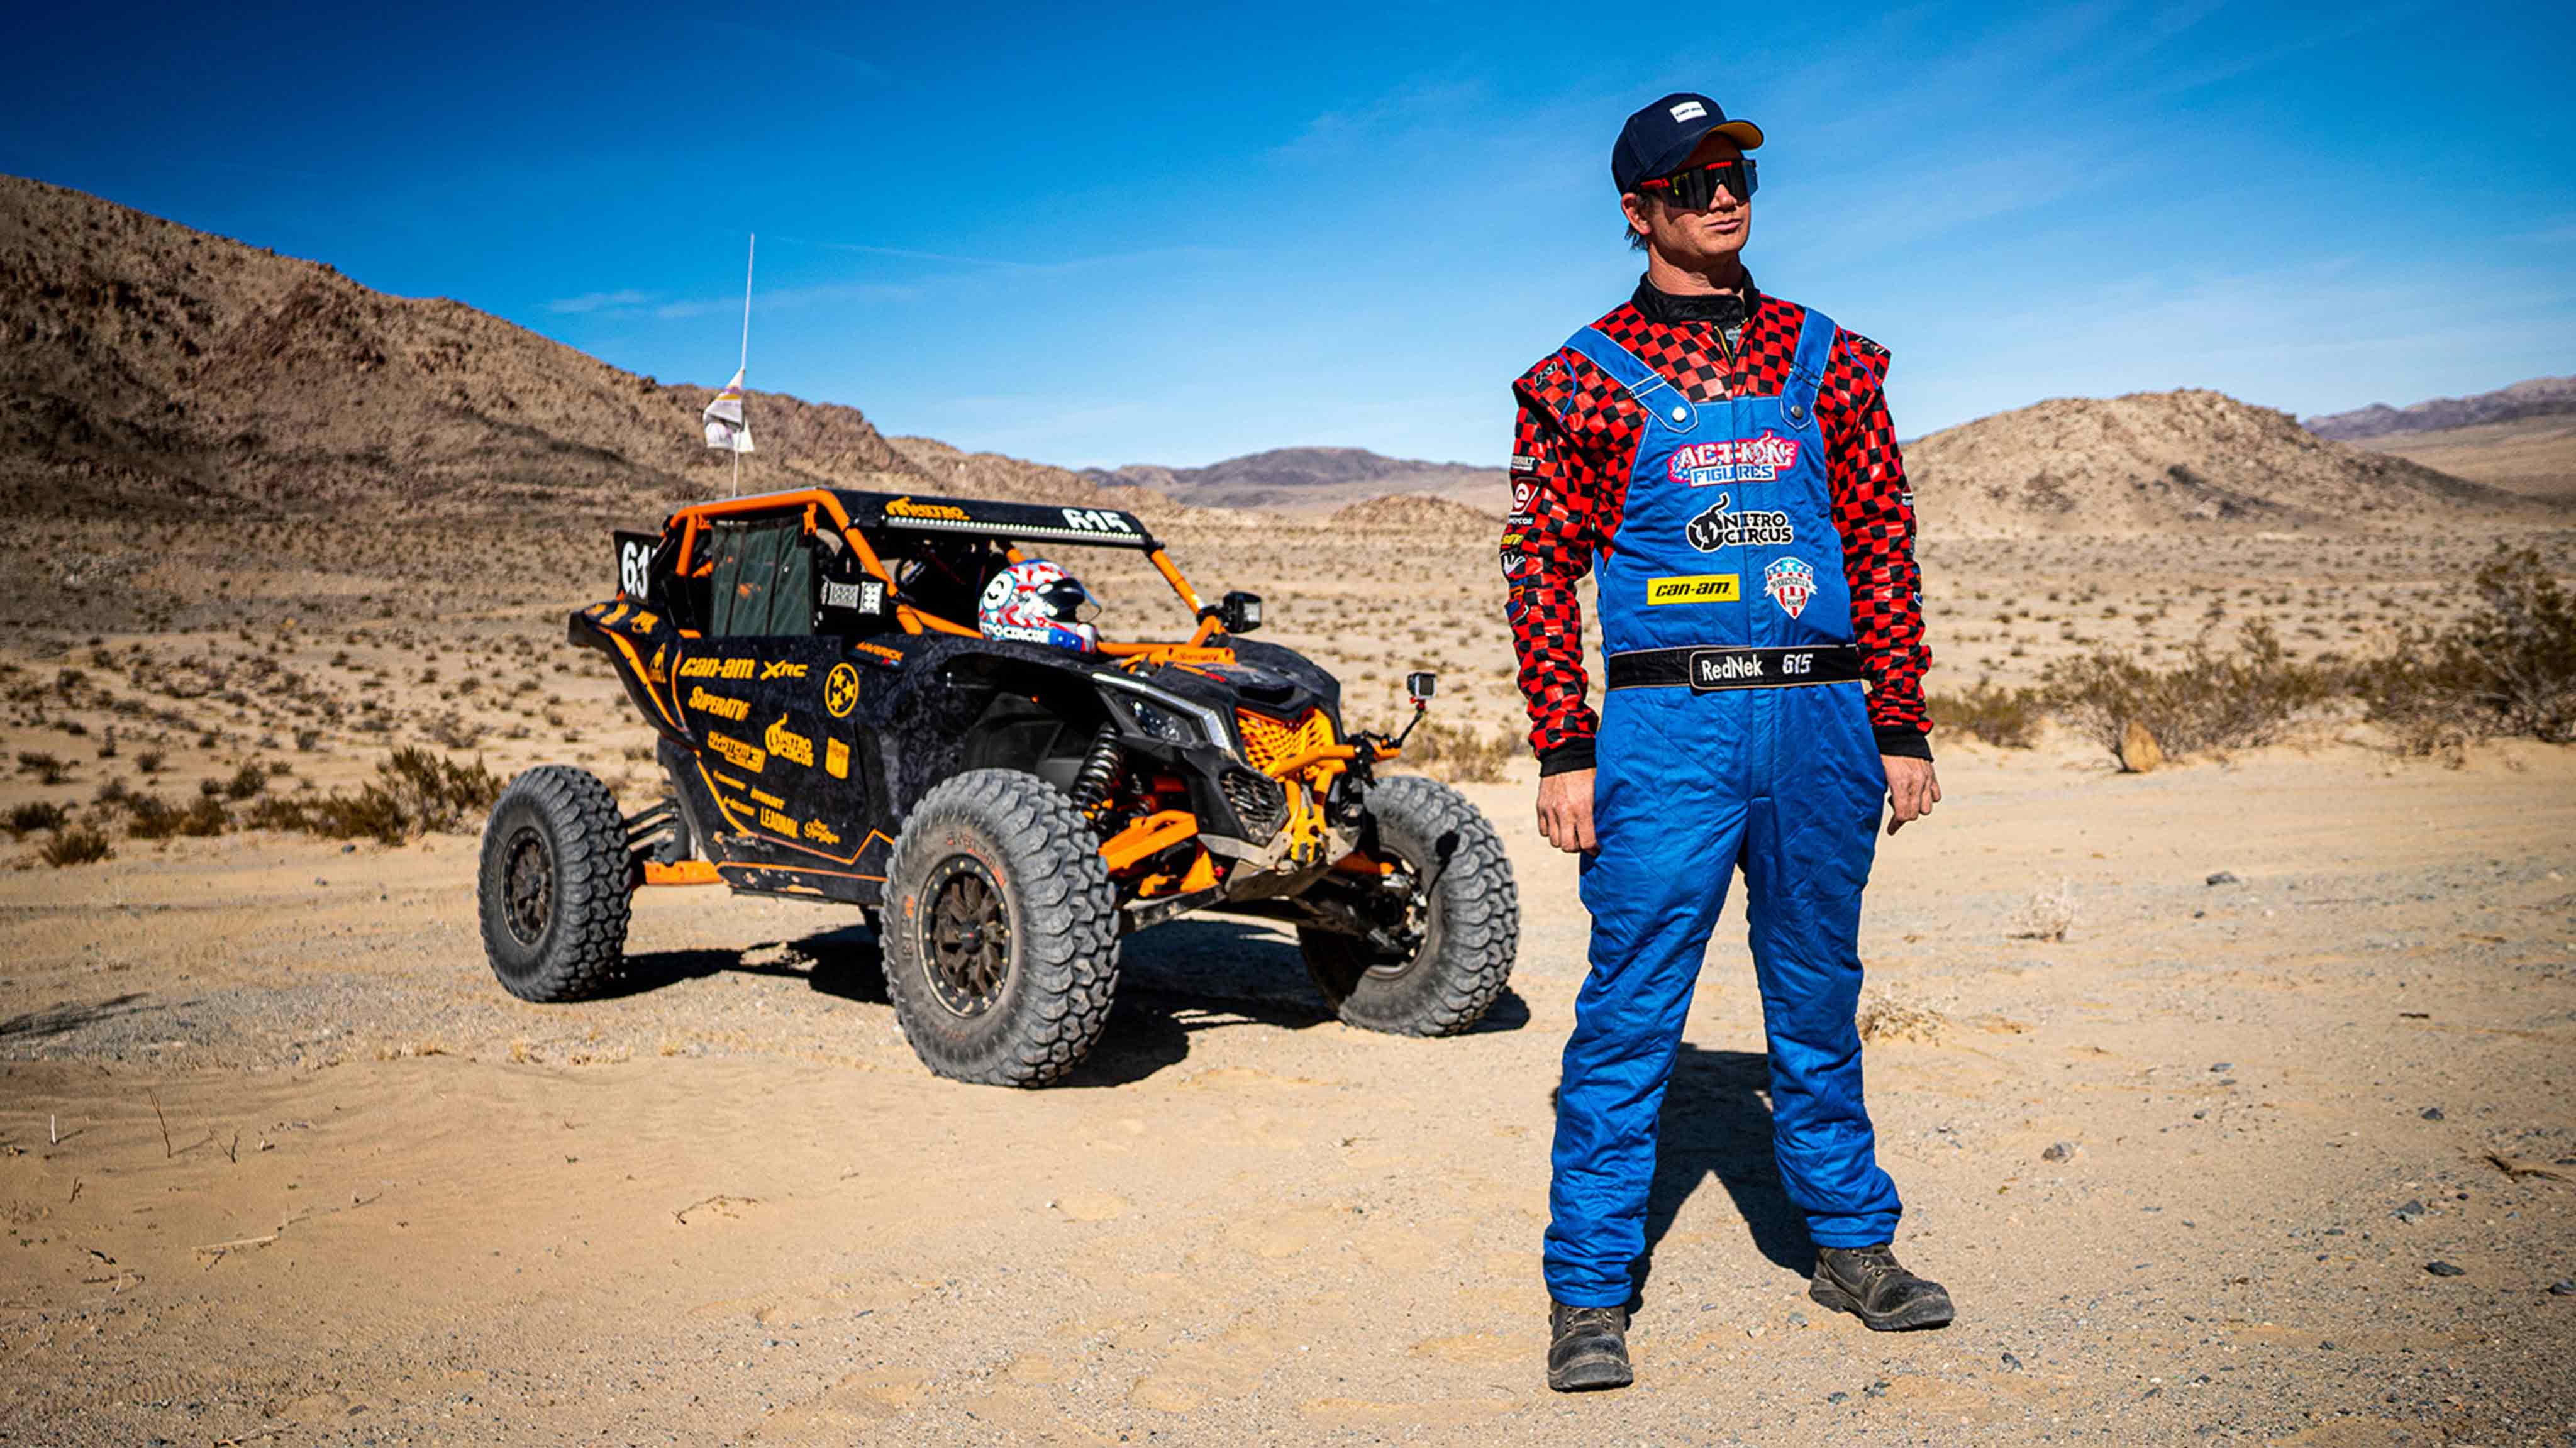 Man with Can-Am Off-Road side-by-side